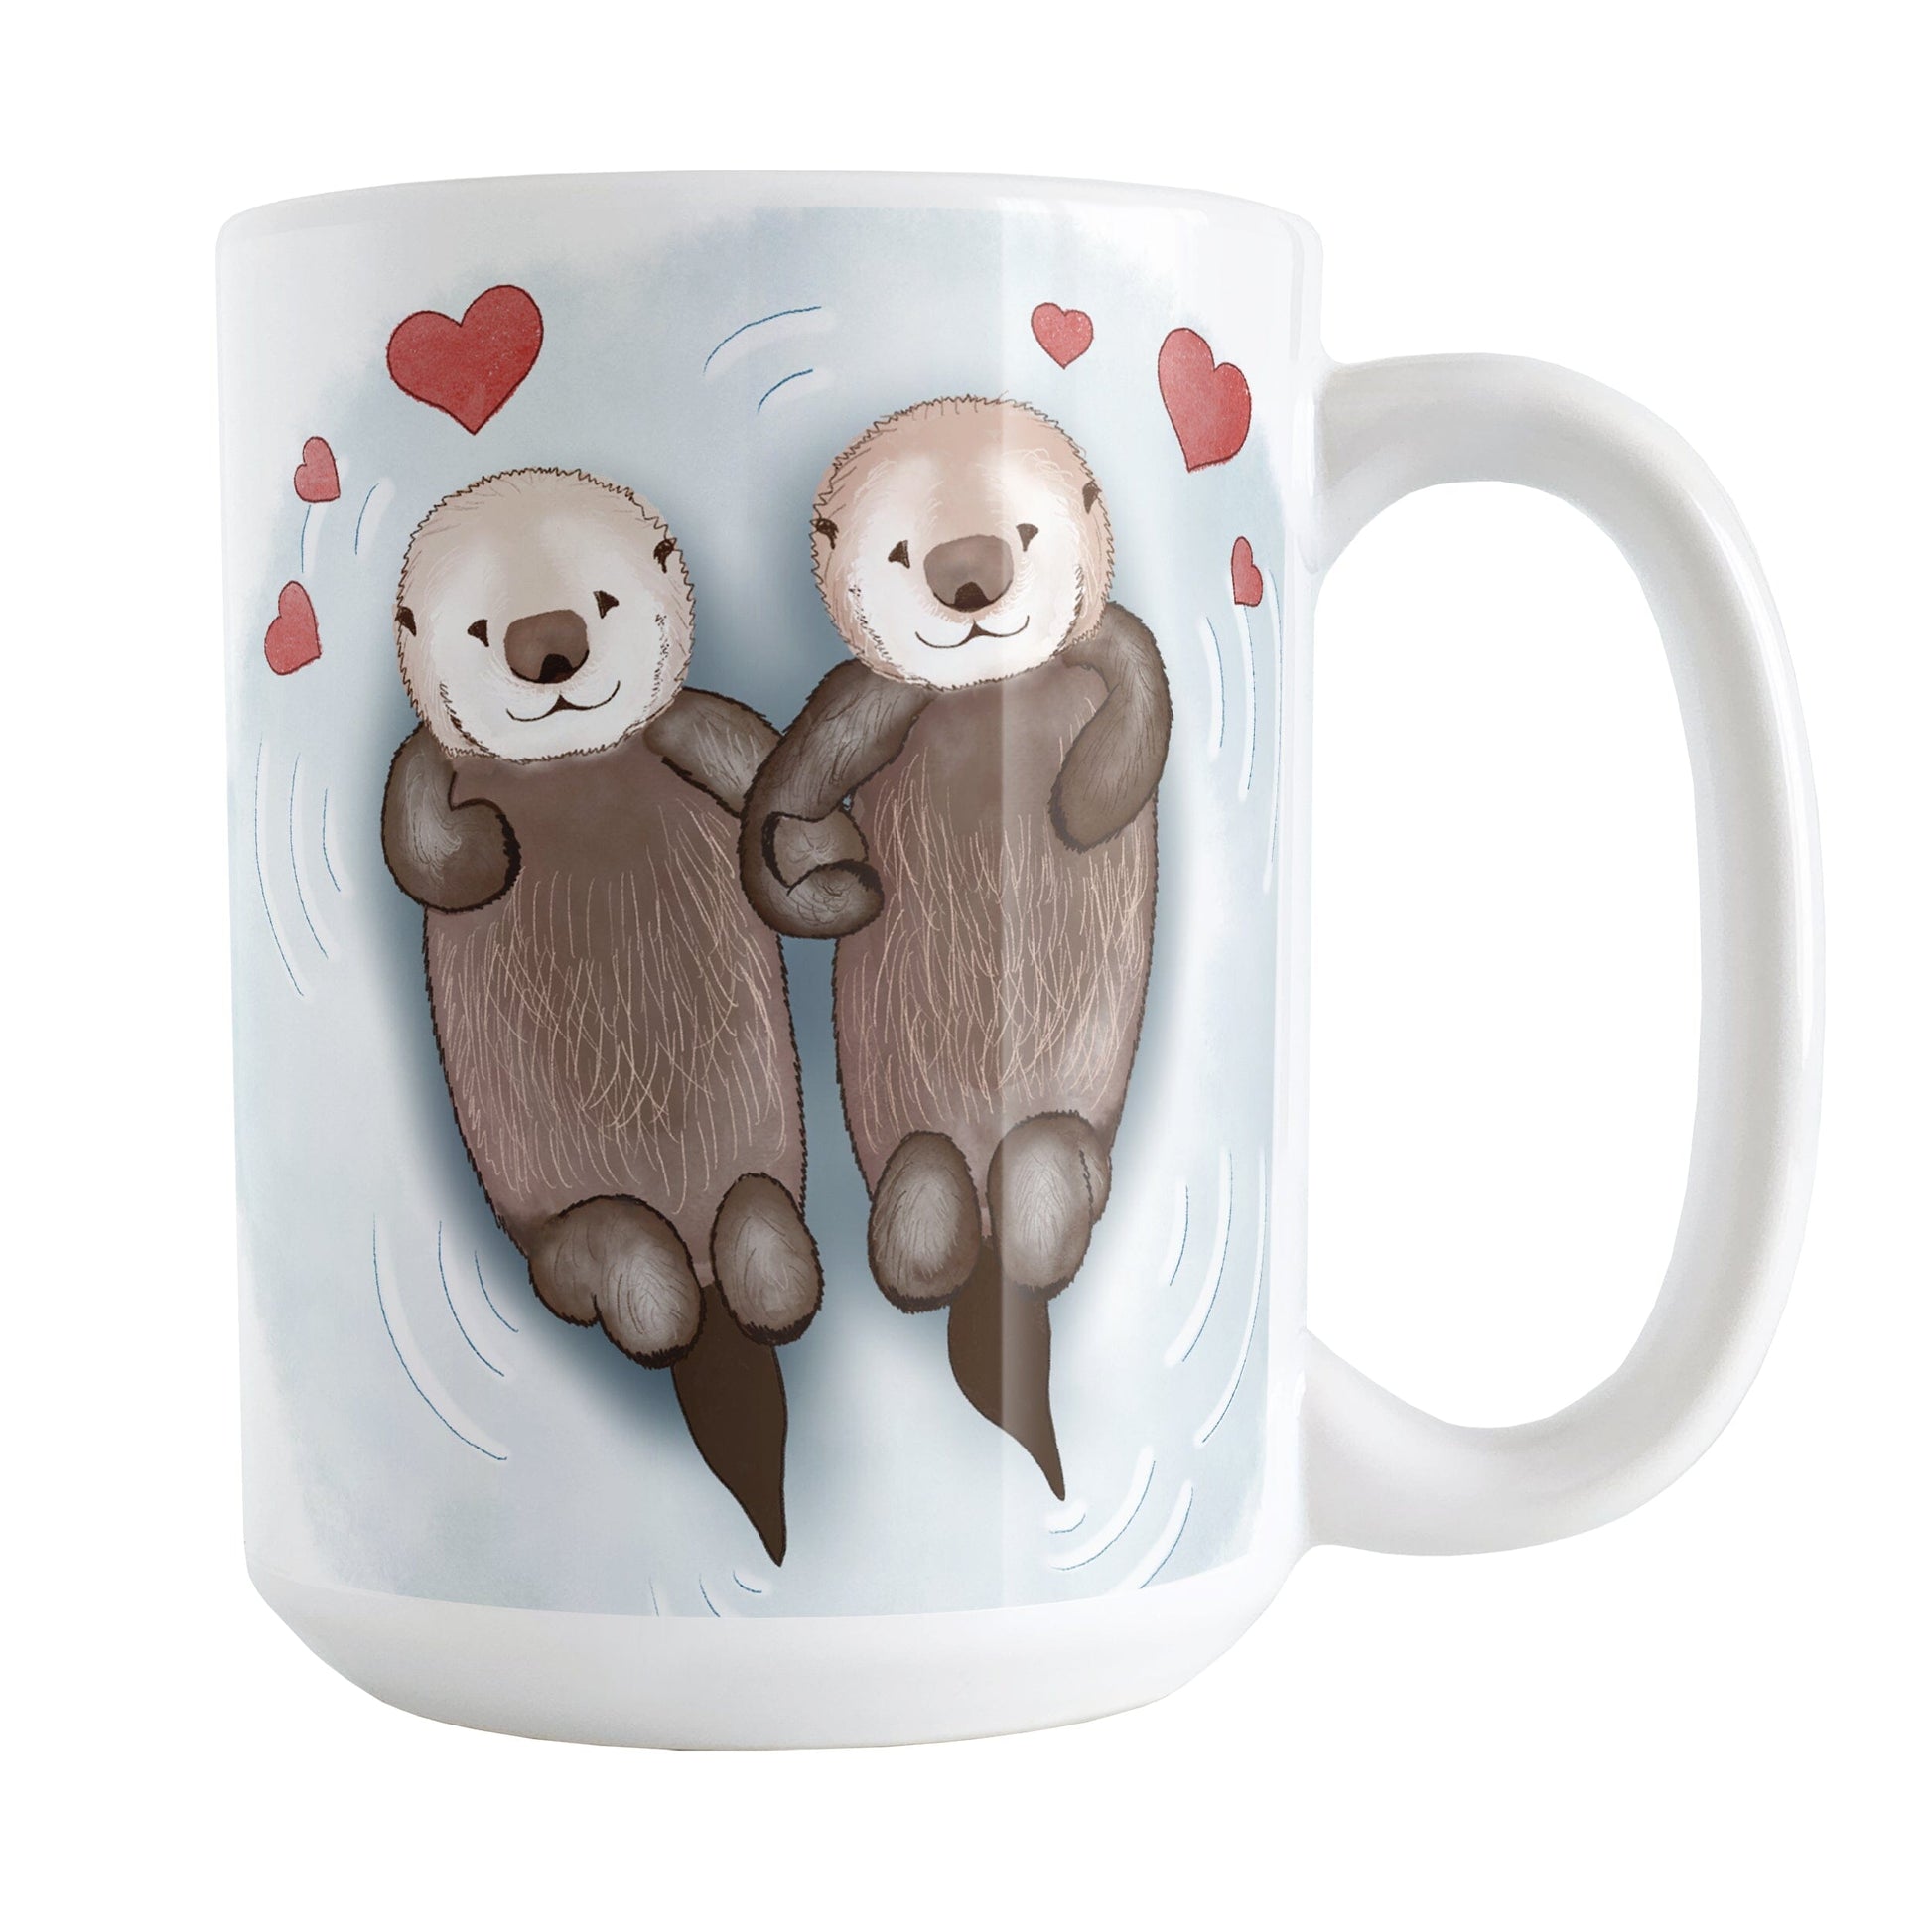 Floating Otters in Love Mug (15oz) at Amy's Coffee Mugs. A ceramic coffee mug designed with a hand-drawn illustration of two cute otters floating in the water, holding hands in love, with red hearts above them. This adorable drawing is on both sides of the mug.